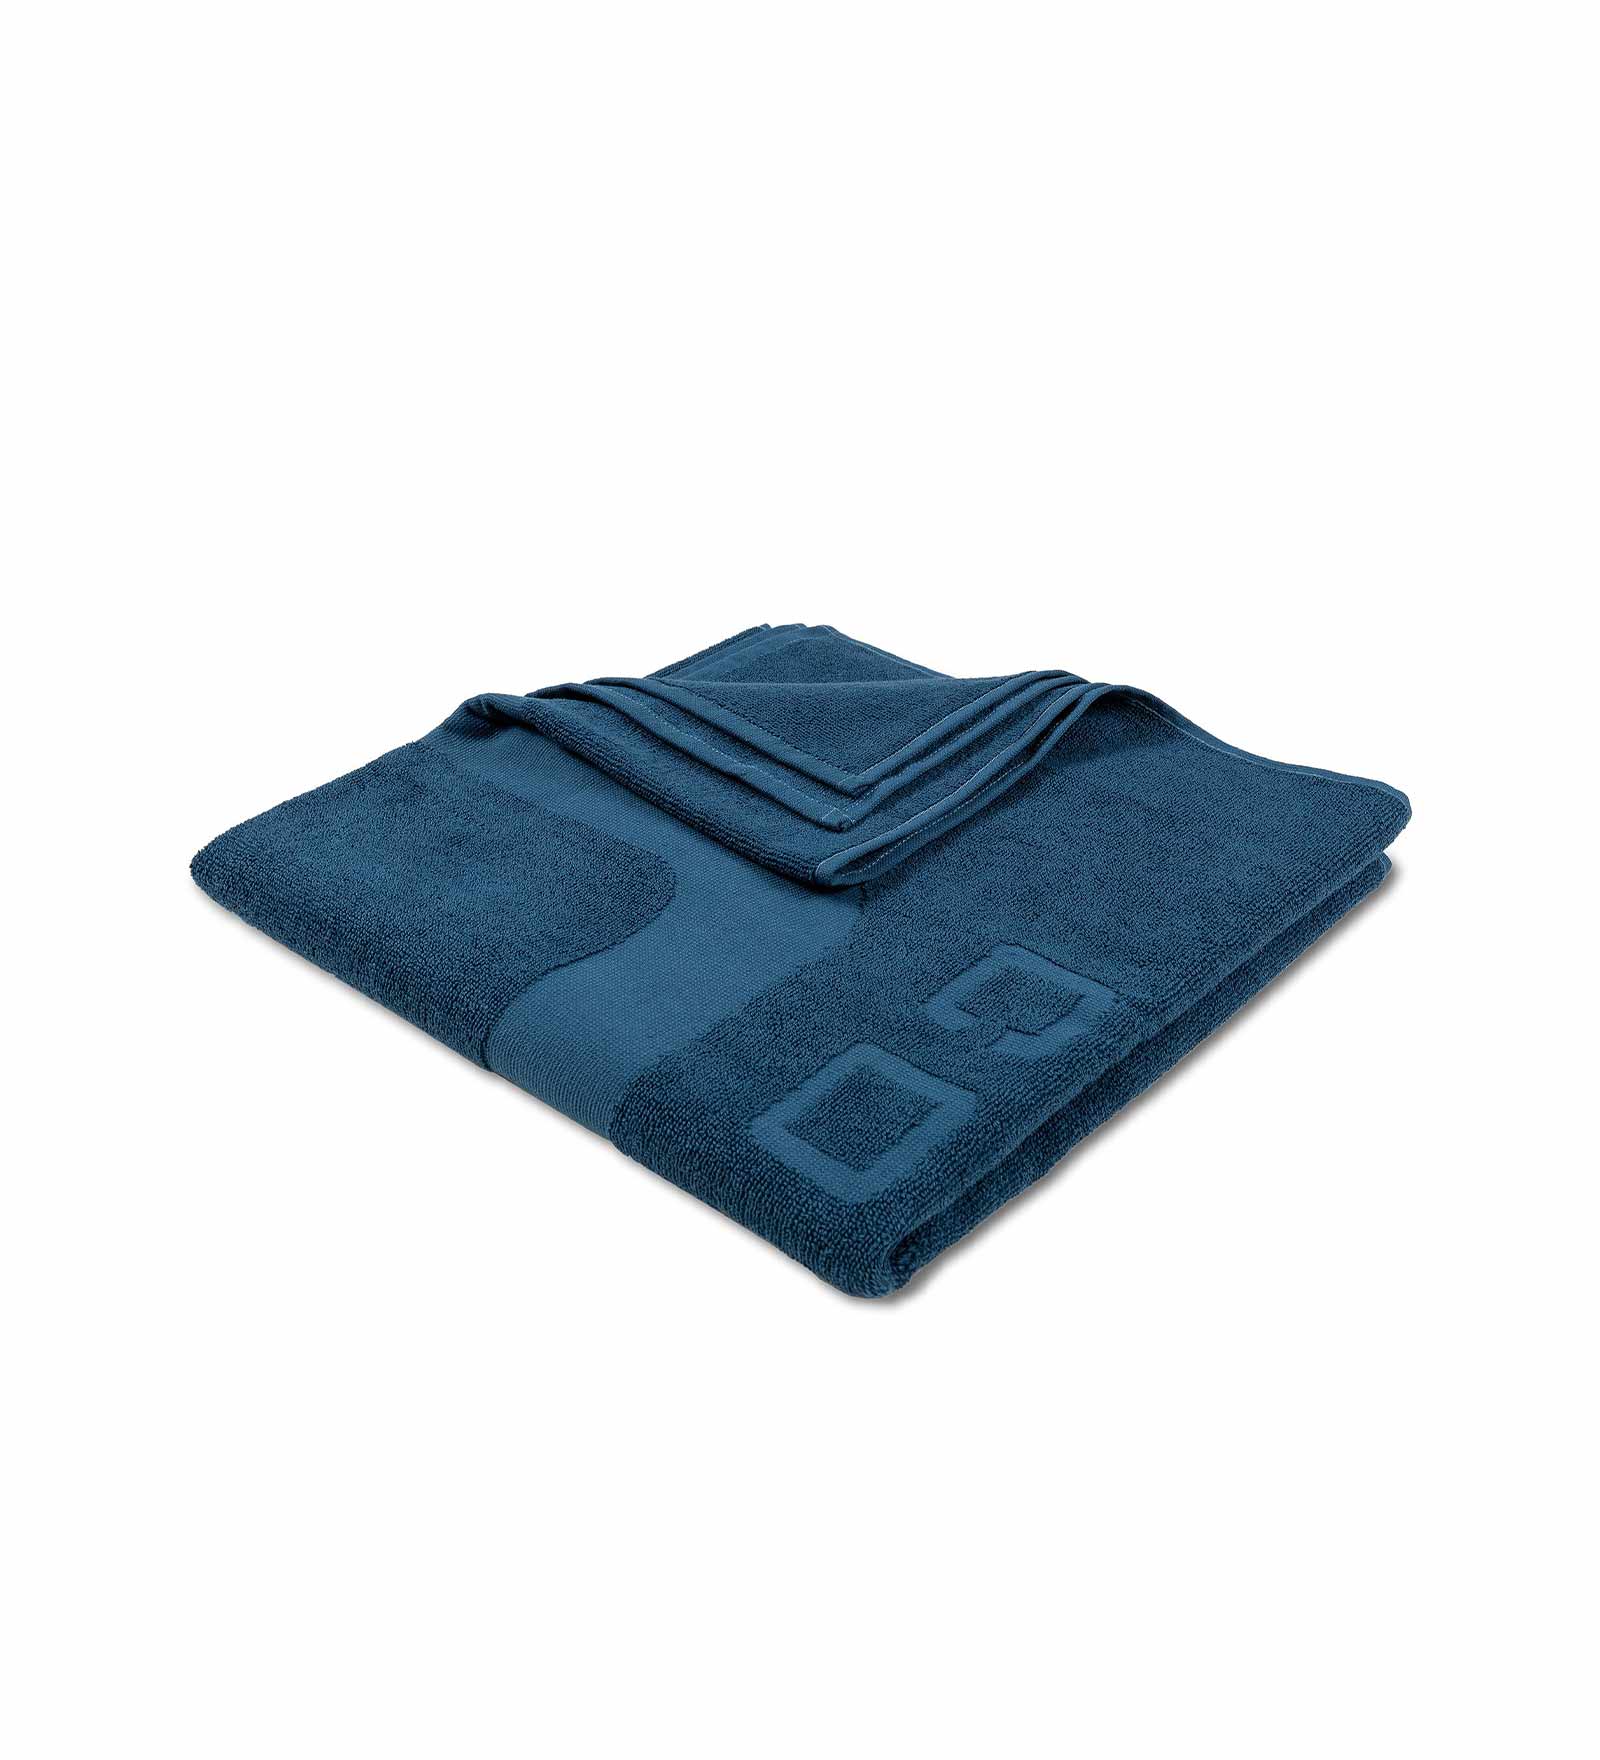 Bath Towel Navy Blue for Men and Women 